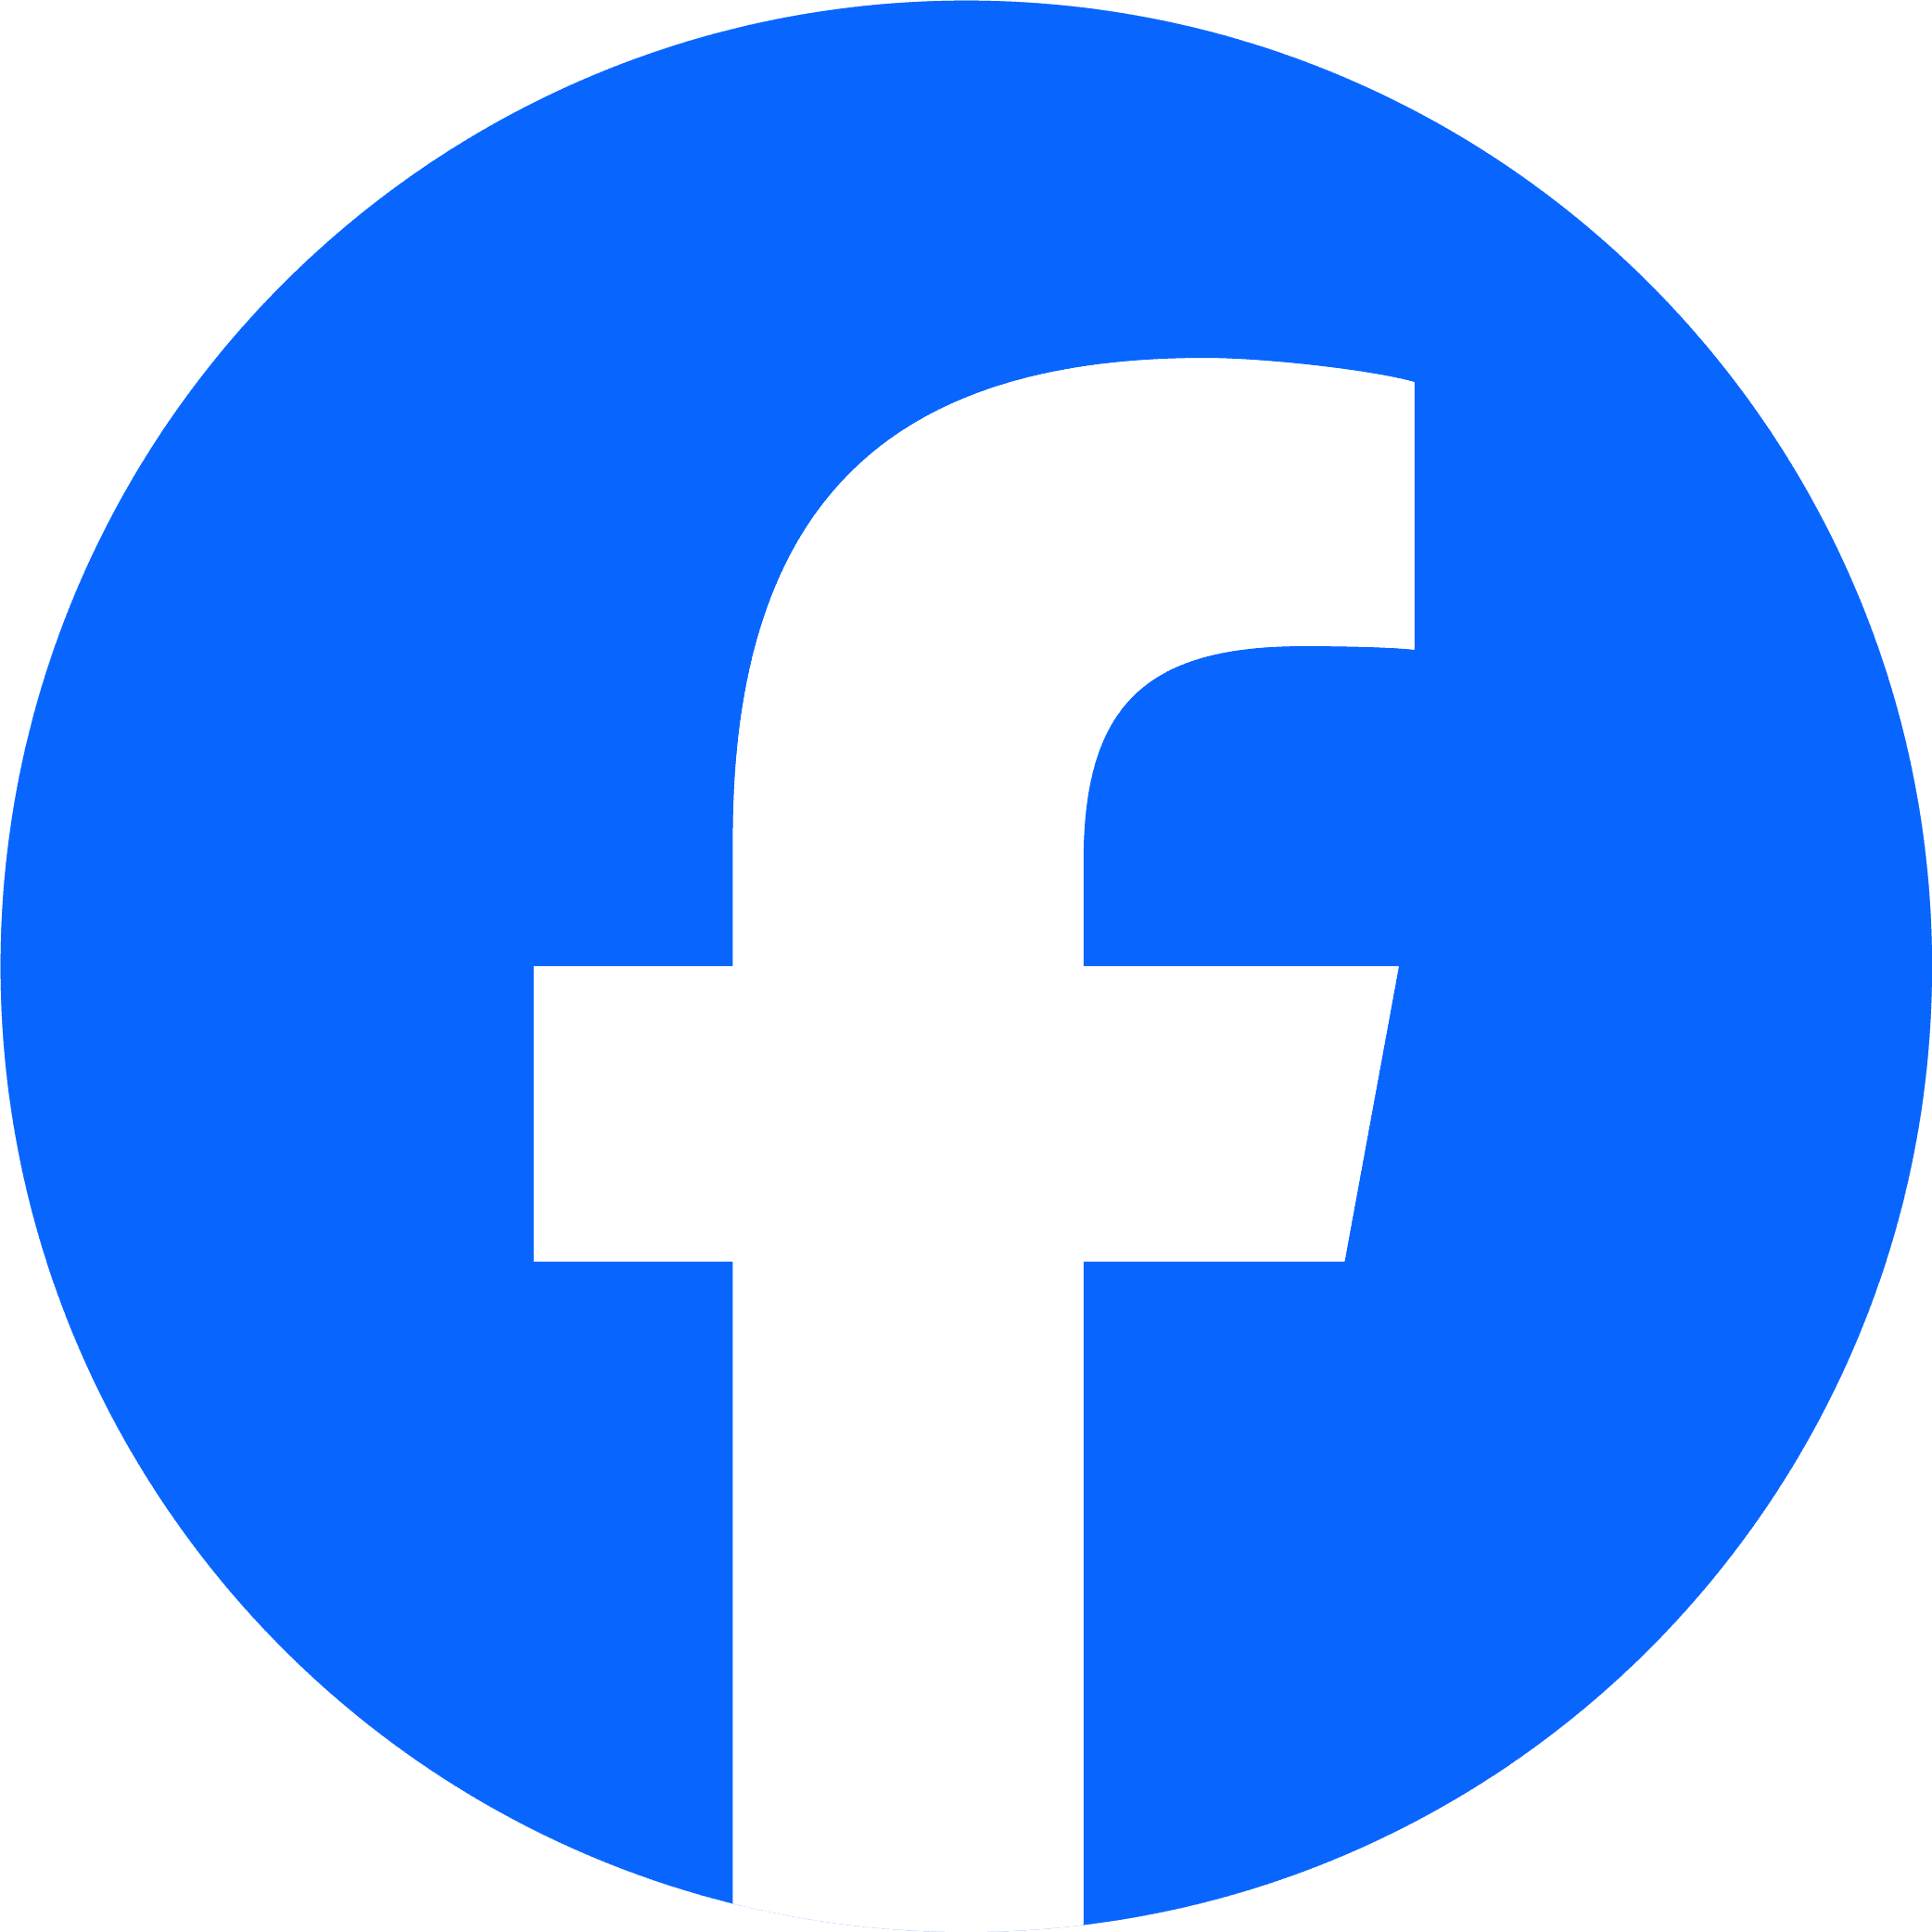 Facebook logo - a lowercase F on a blue background